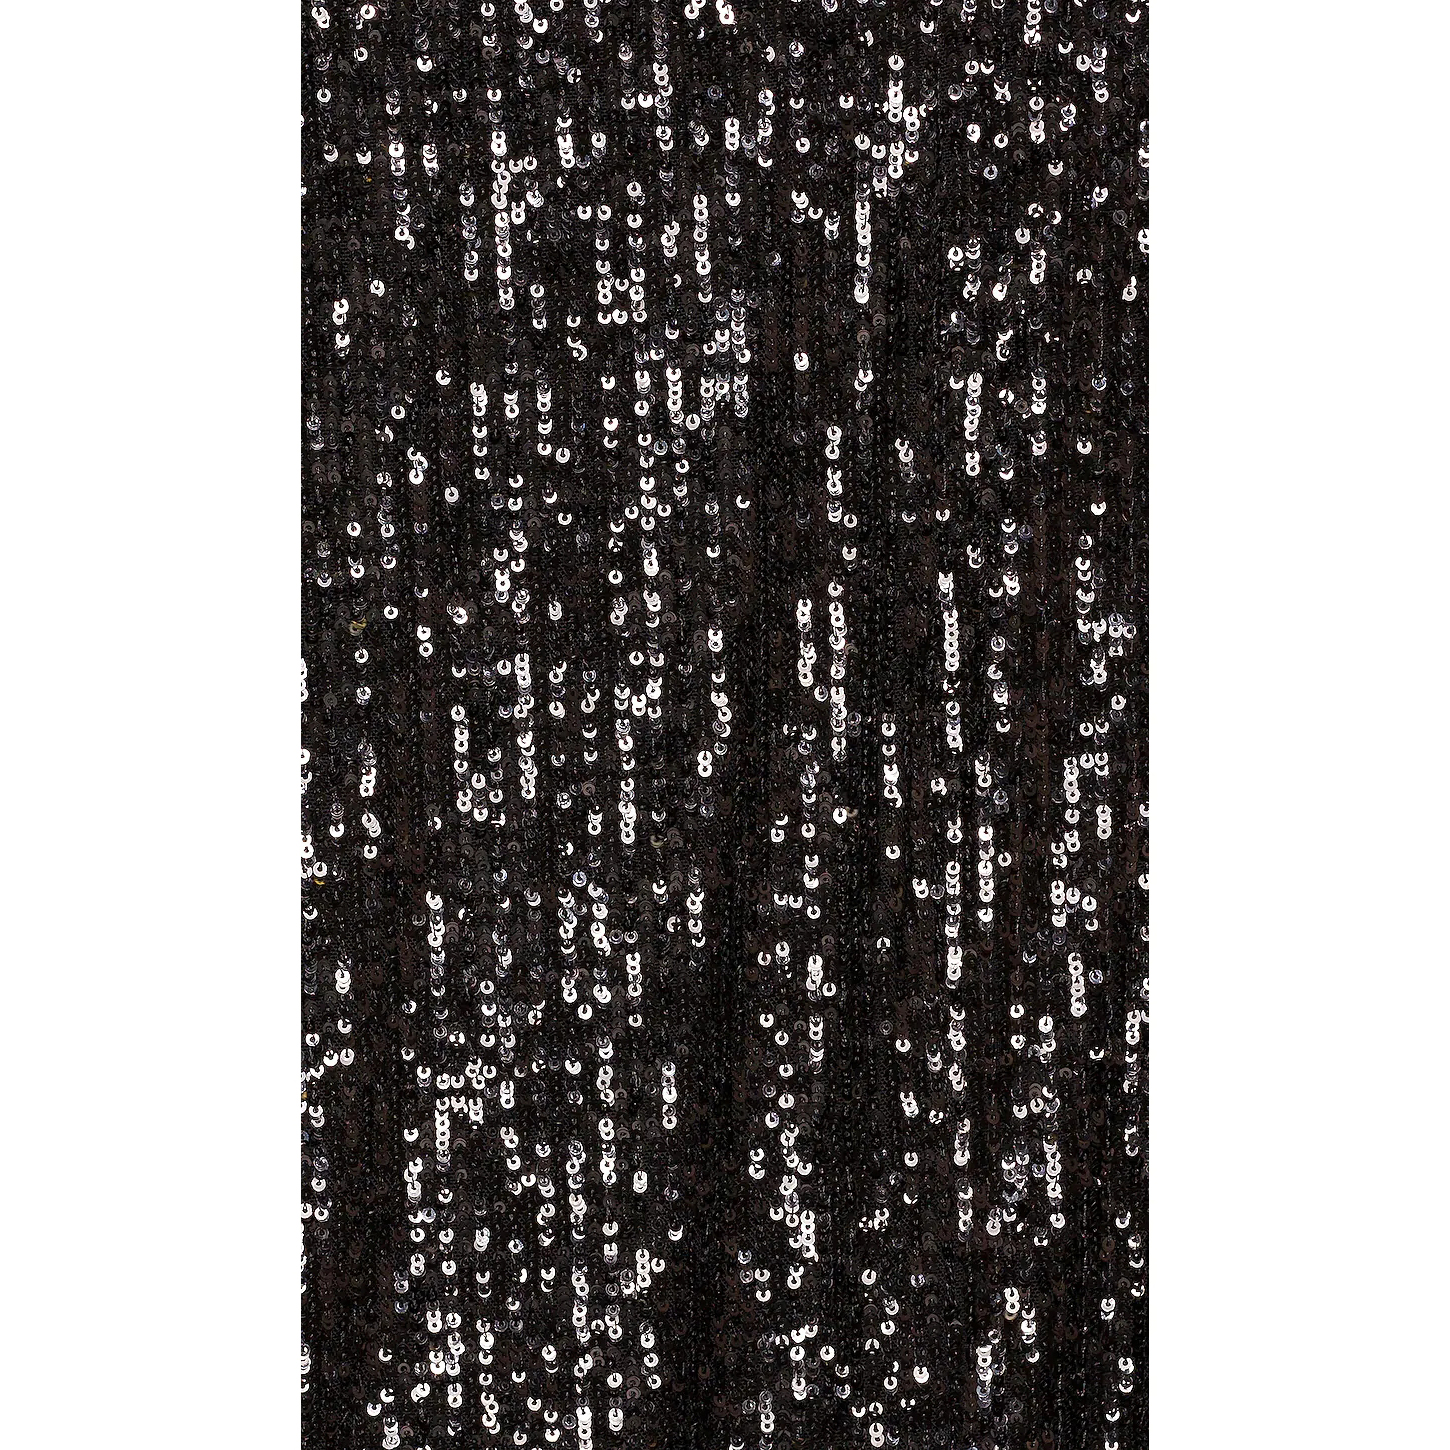 black sequin fabric,any fabric to you choose.